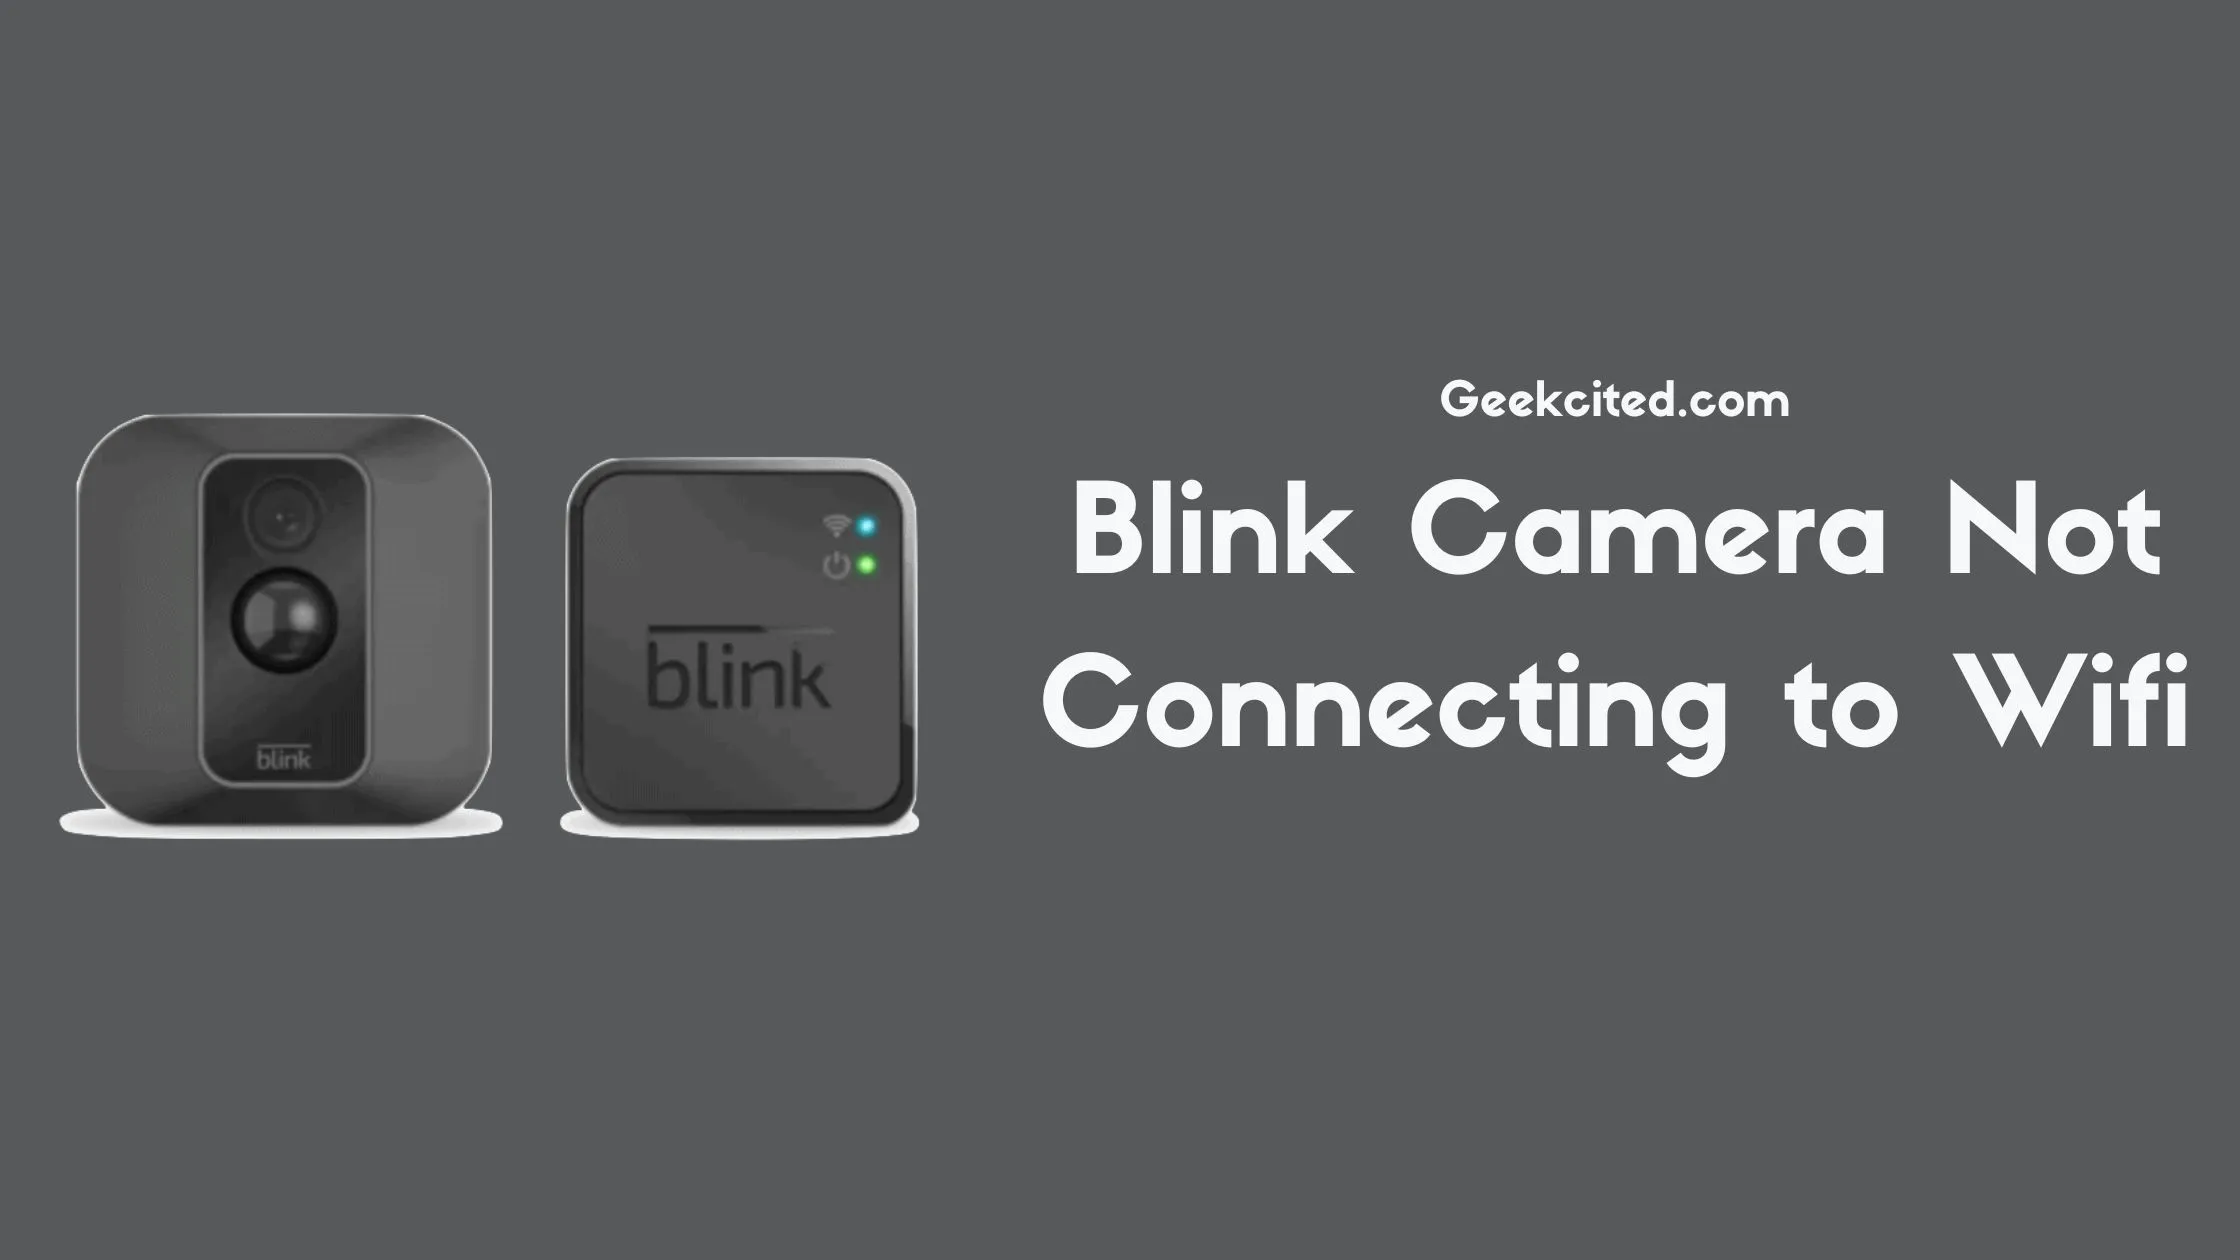 Blink Camera Not Connecting to Wifi